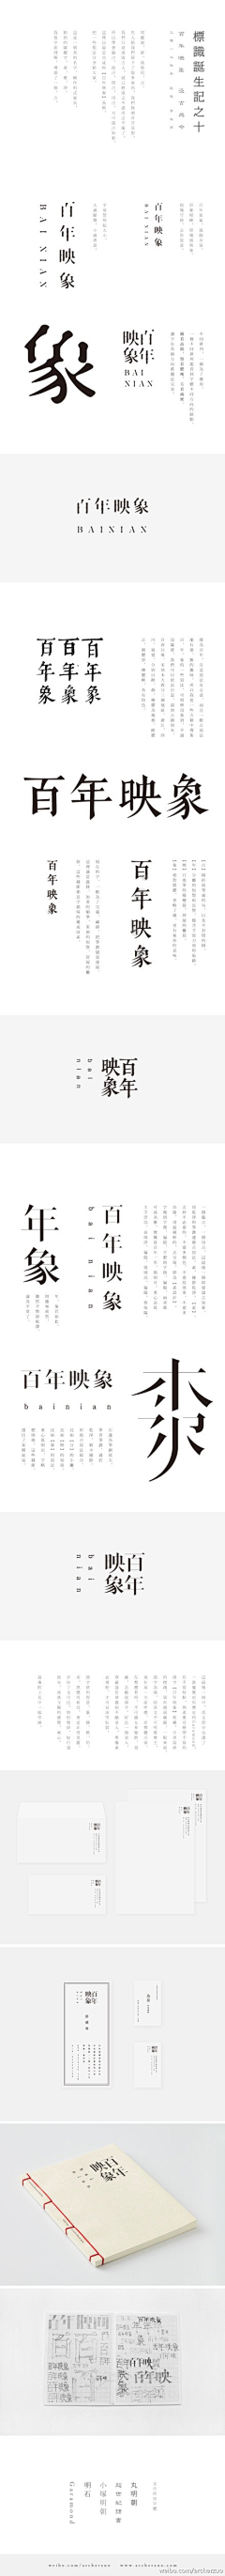 Justin-feng采集到字体设计